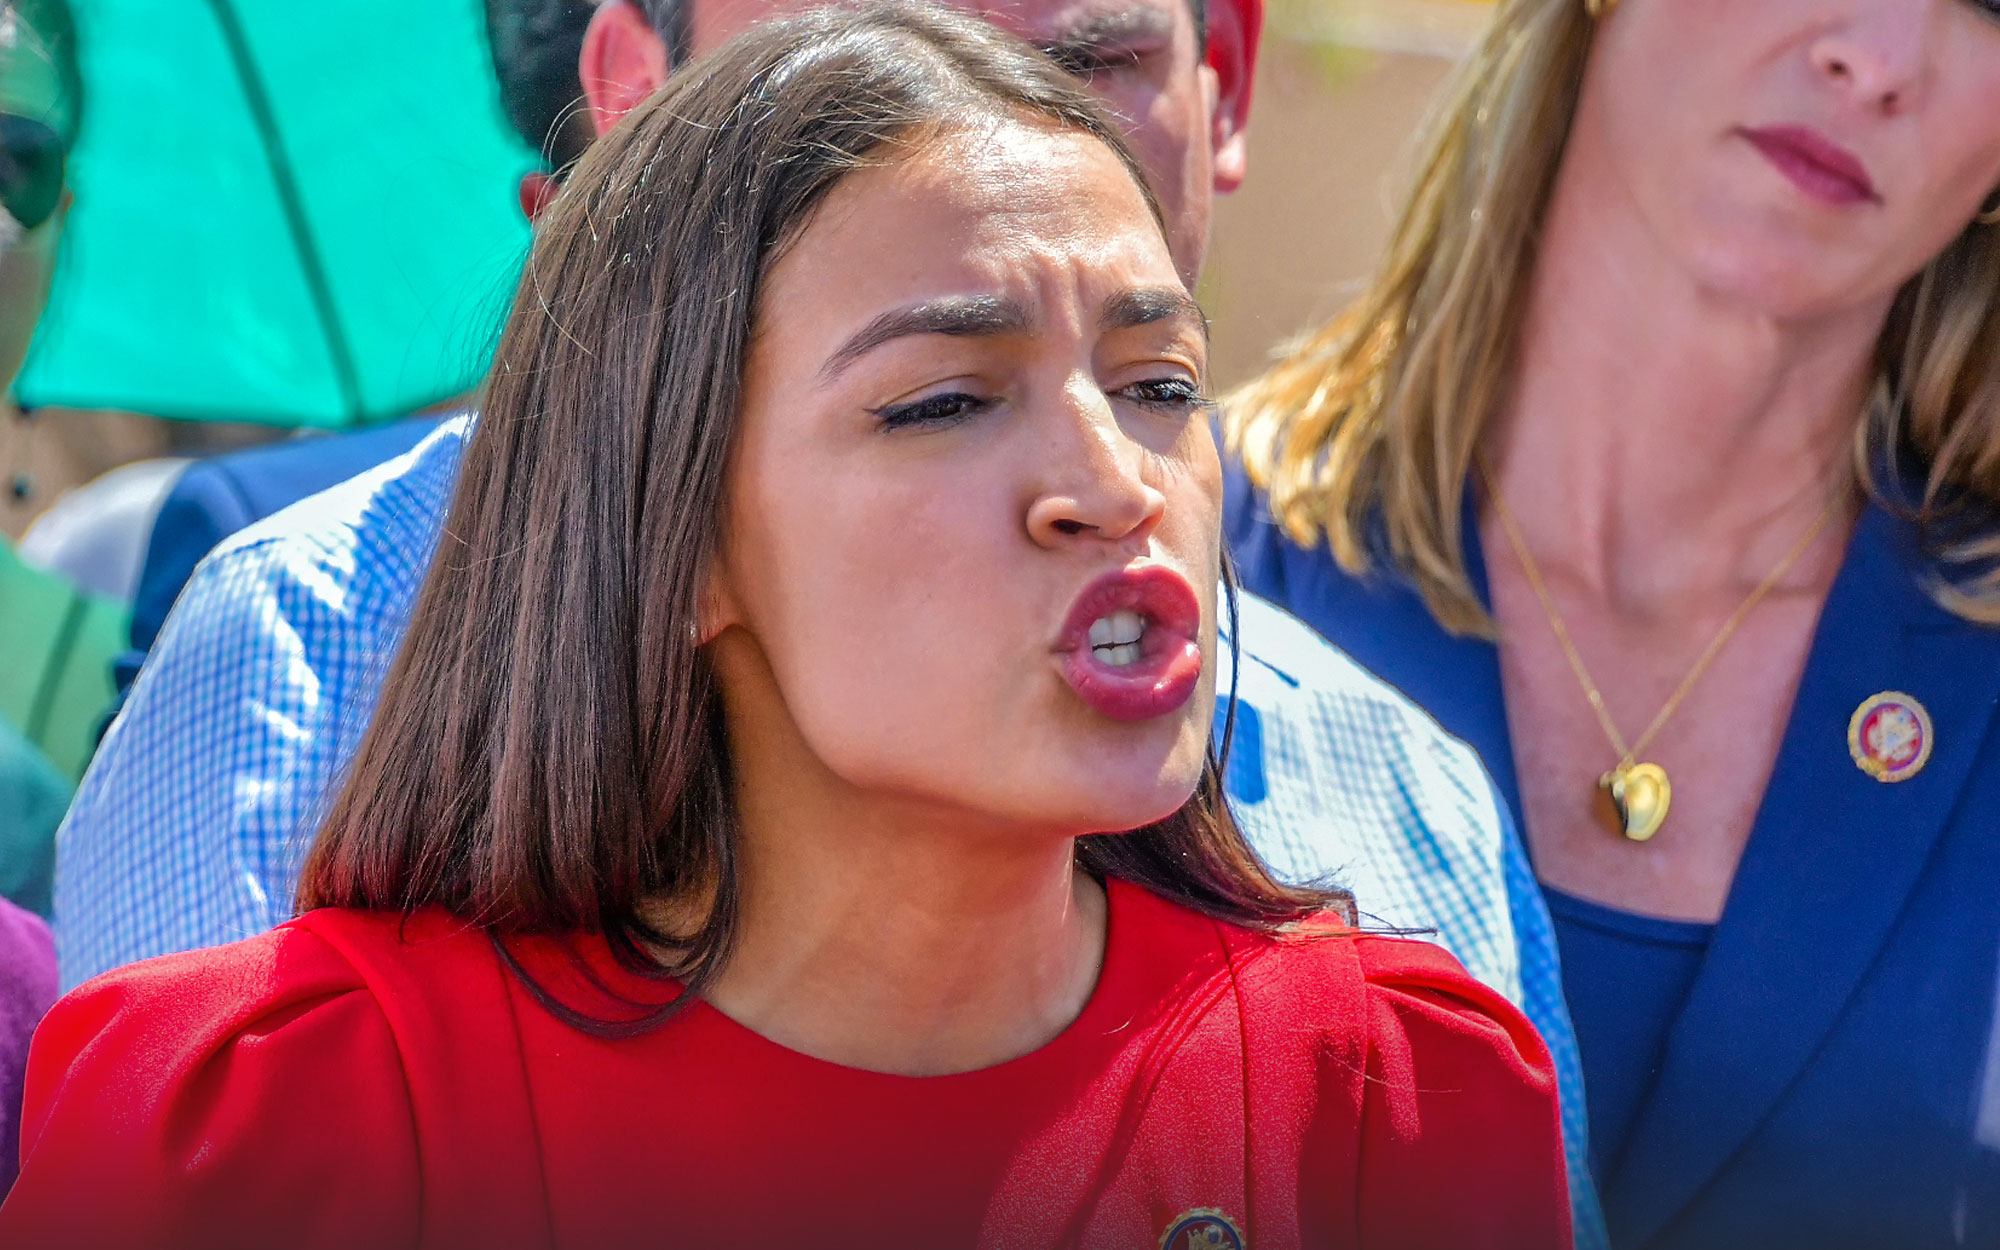 AOC wants White people to know they’re racist, even if